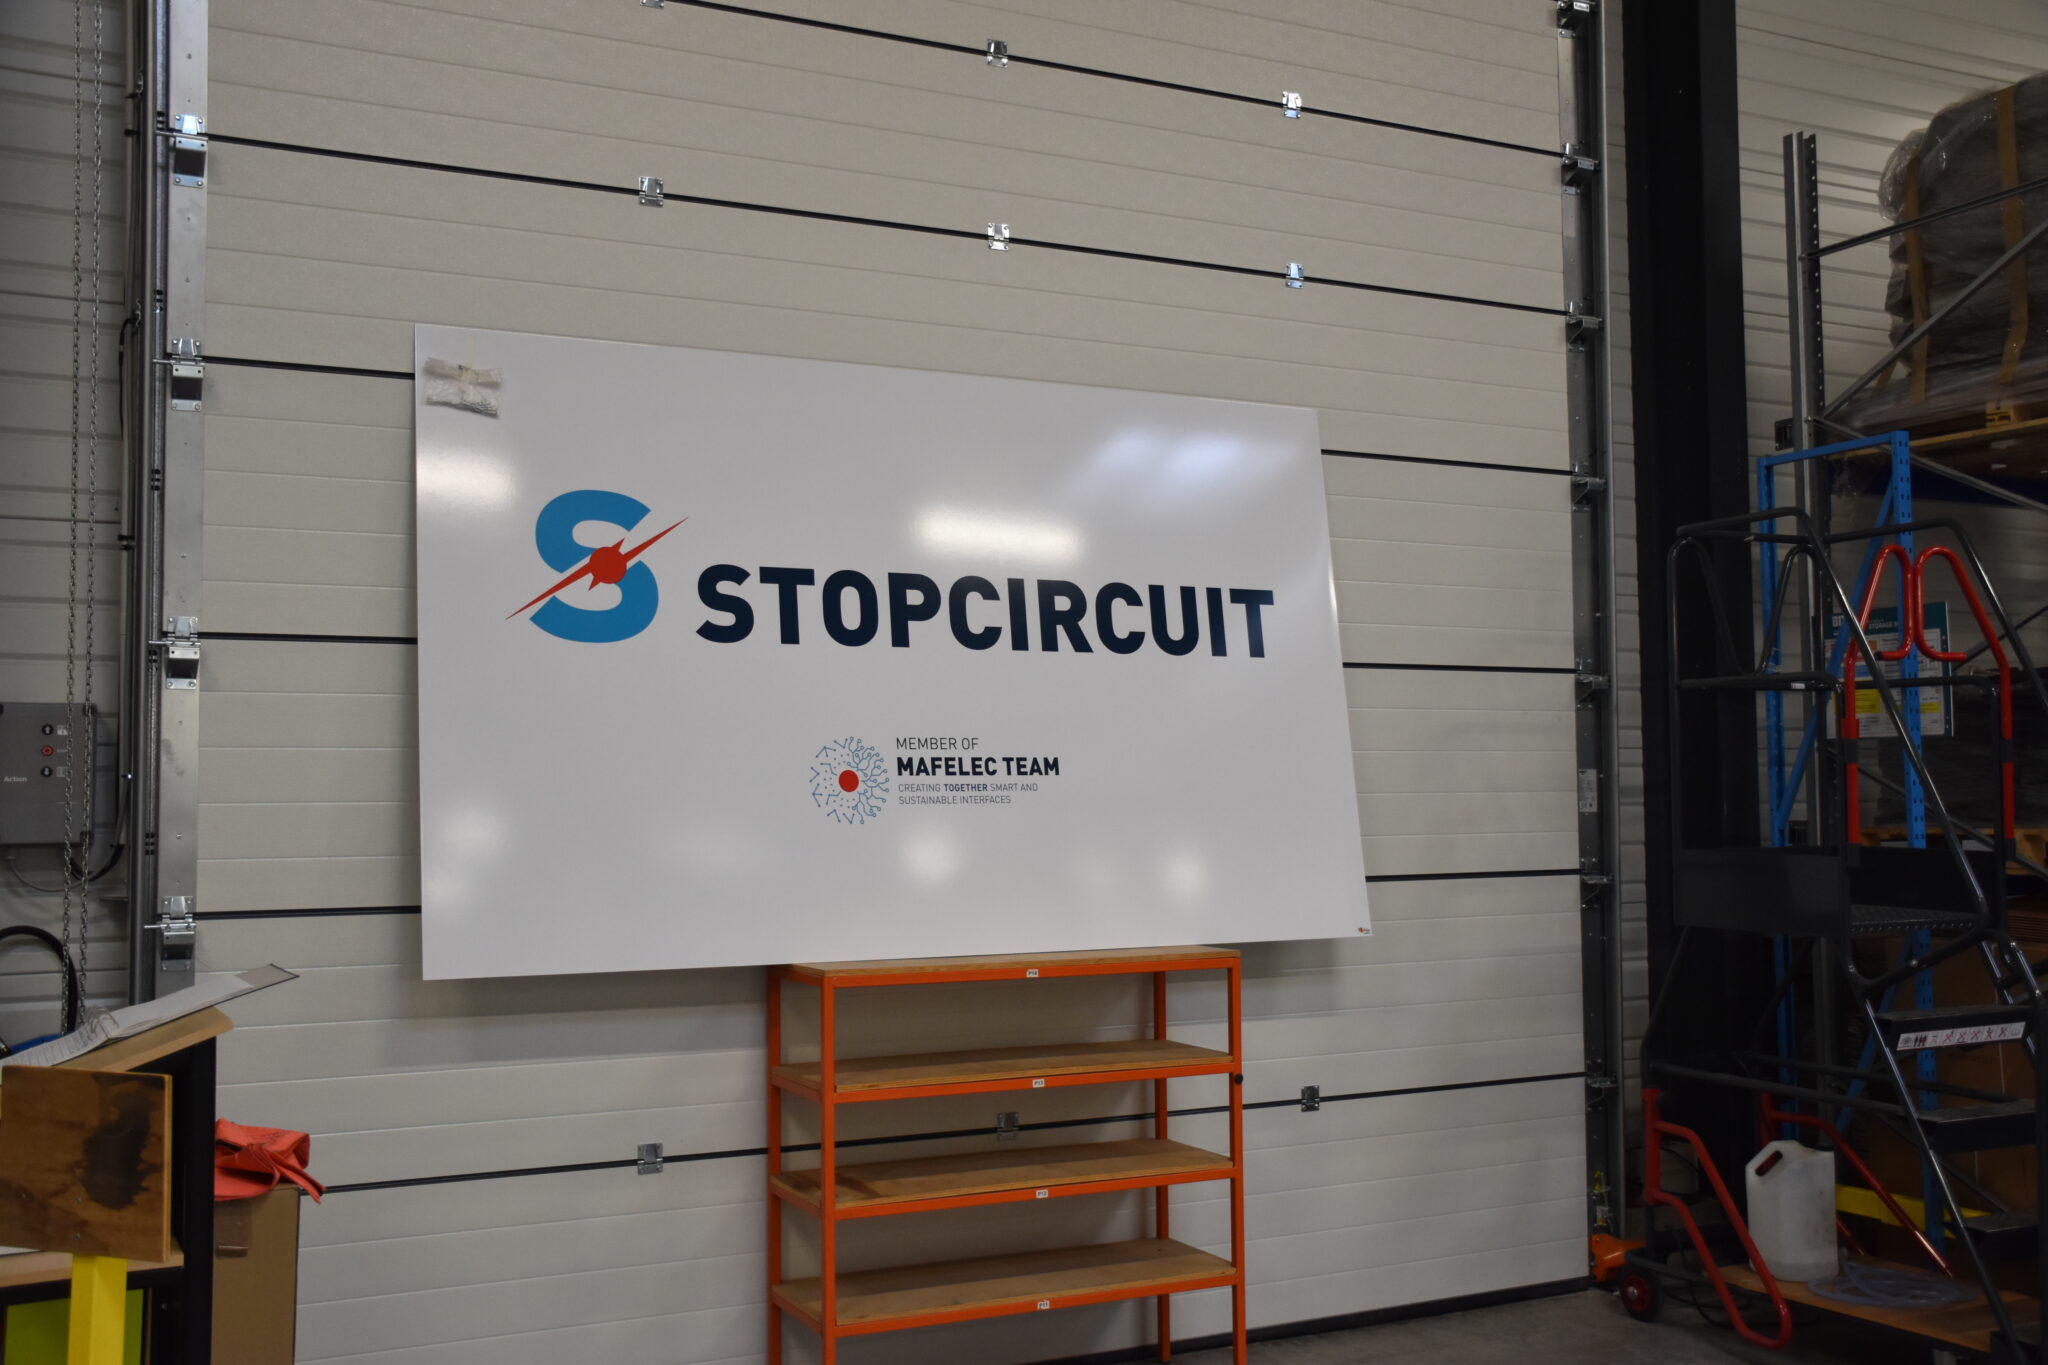 Stopcircuit moves into its new home!